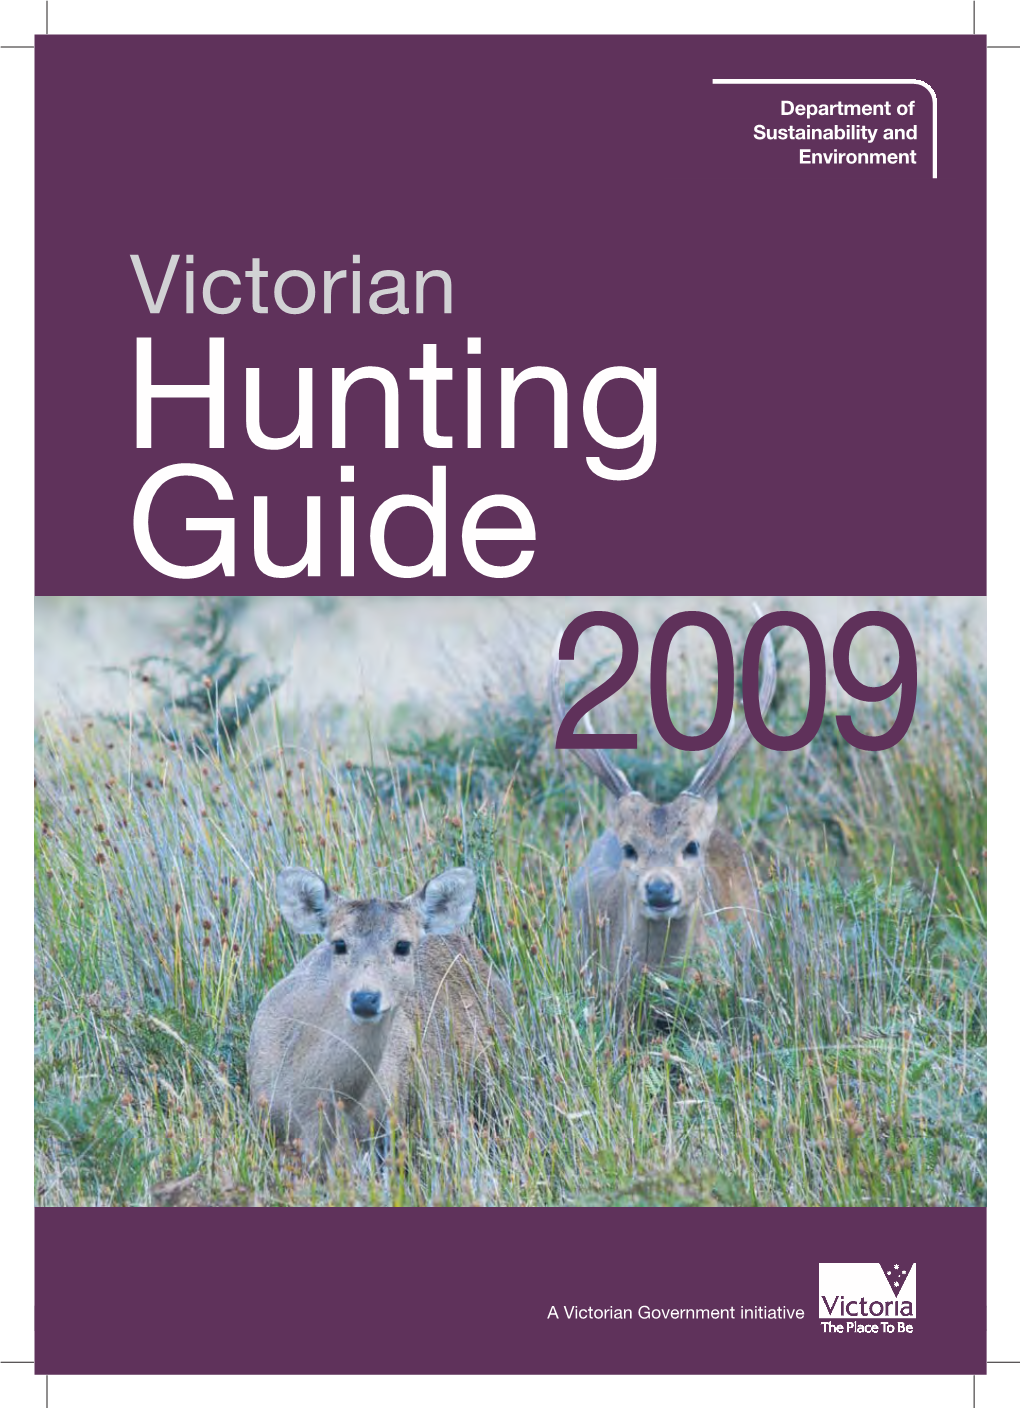 Hunting Guide 2009 Final.Indd